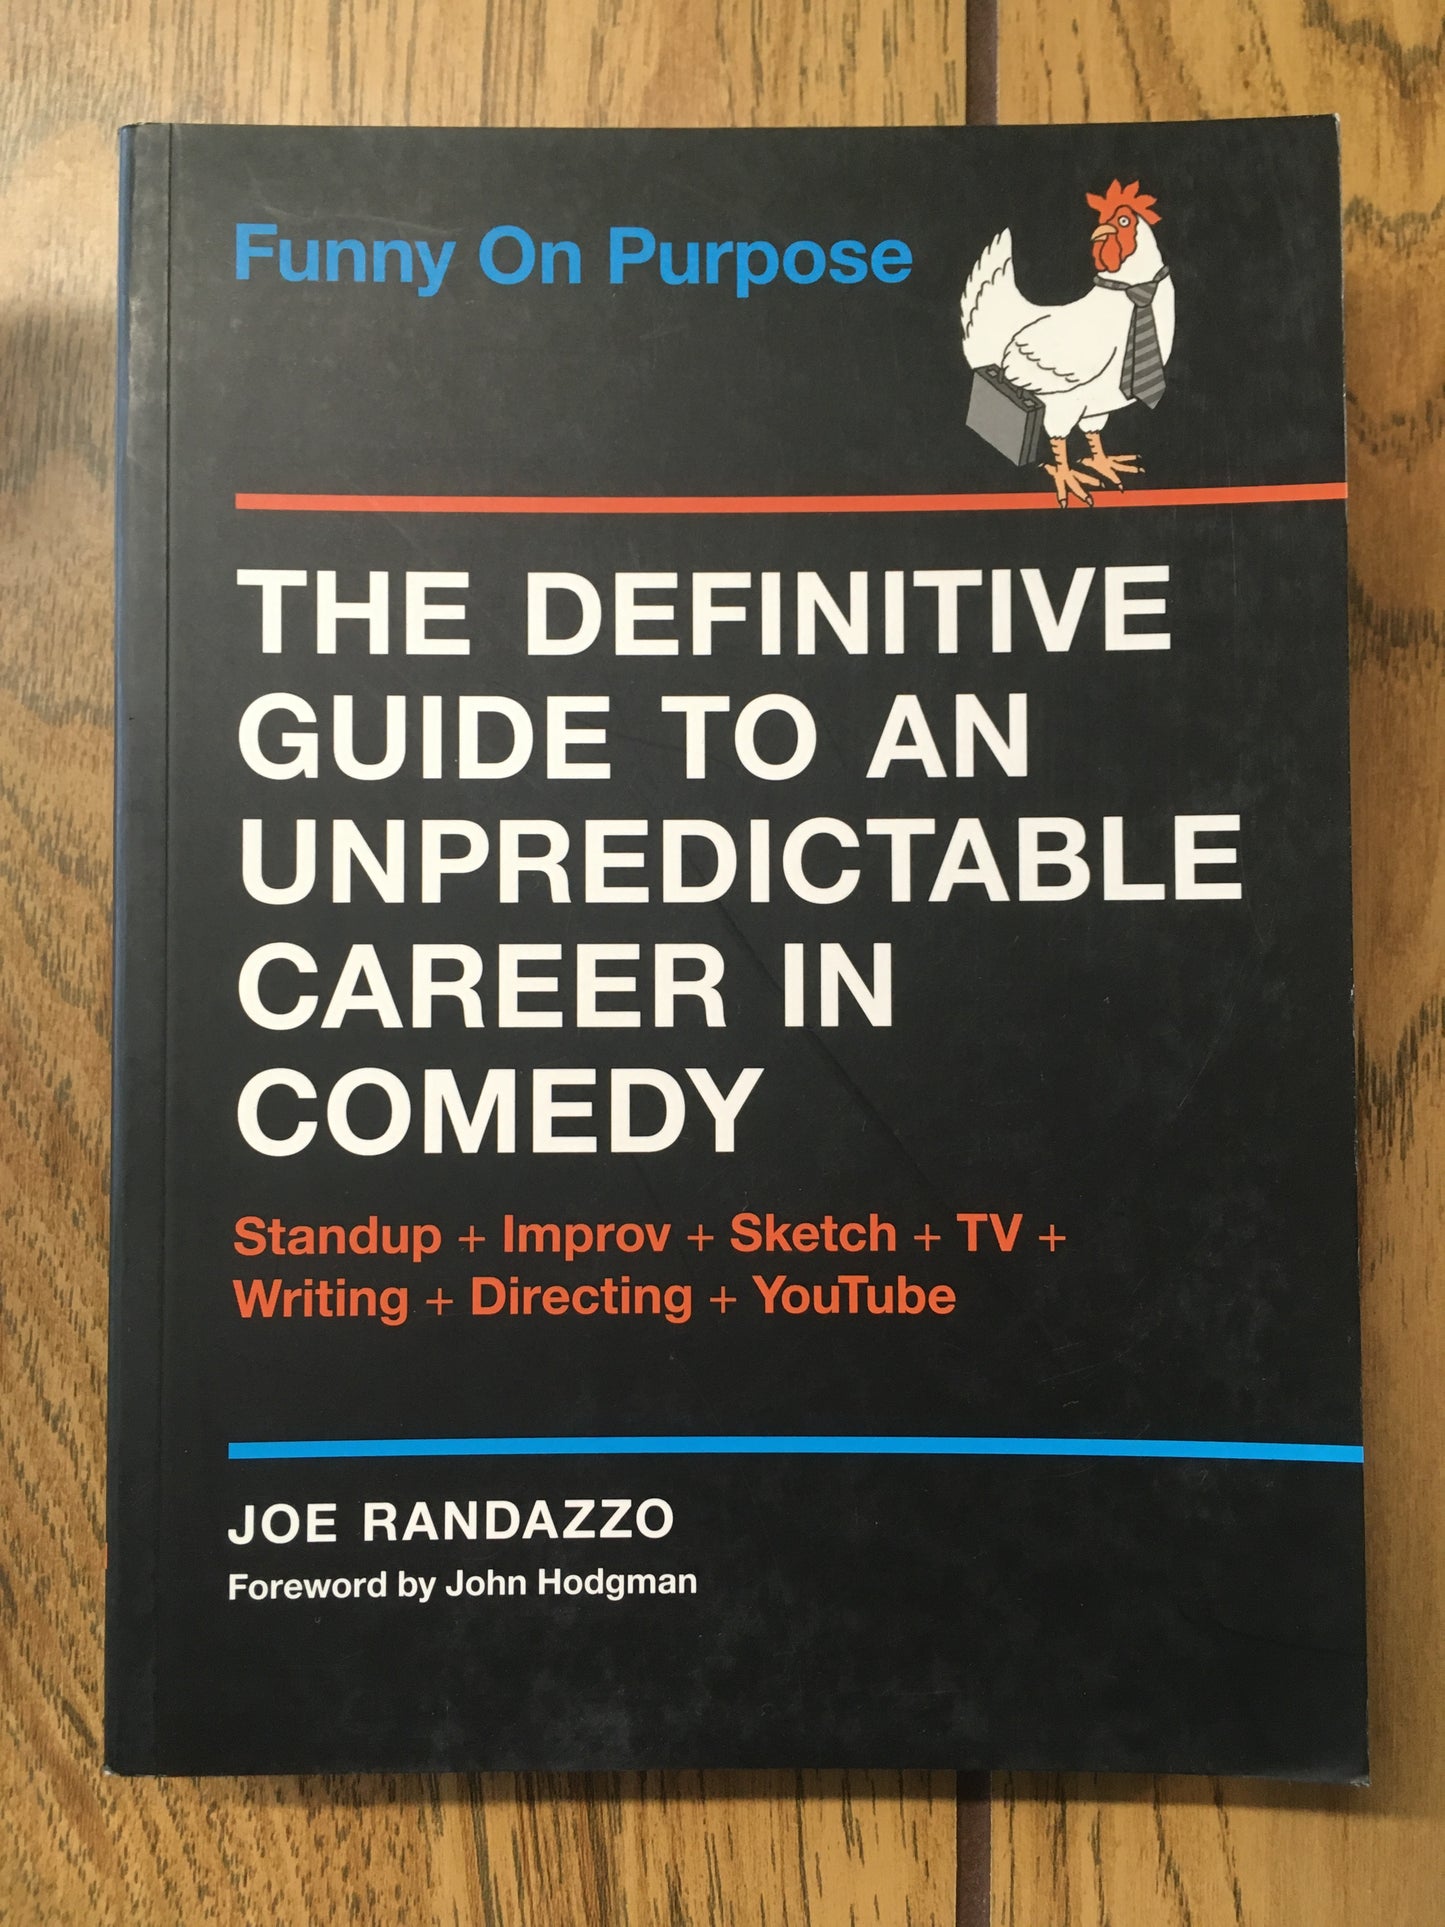 Funny on Purpose: The Definitive Guide to an Unpredictable Career in Comedy